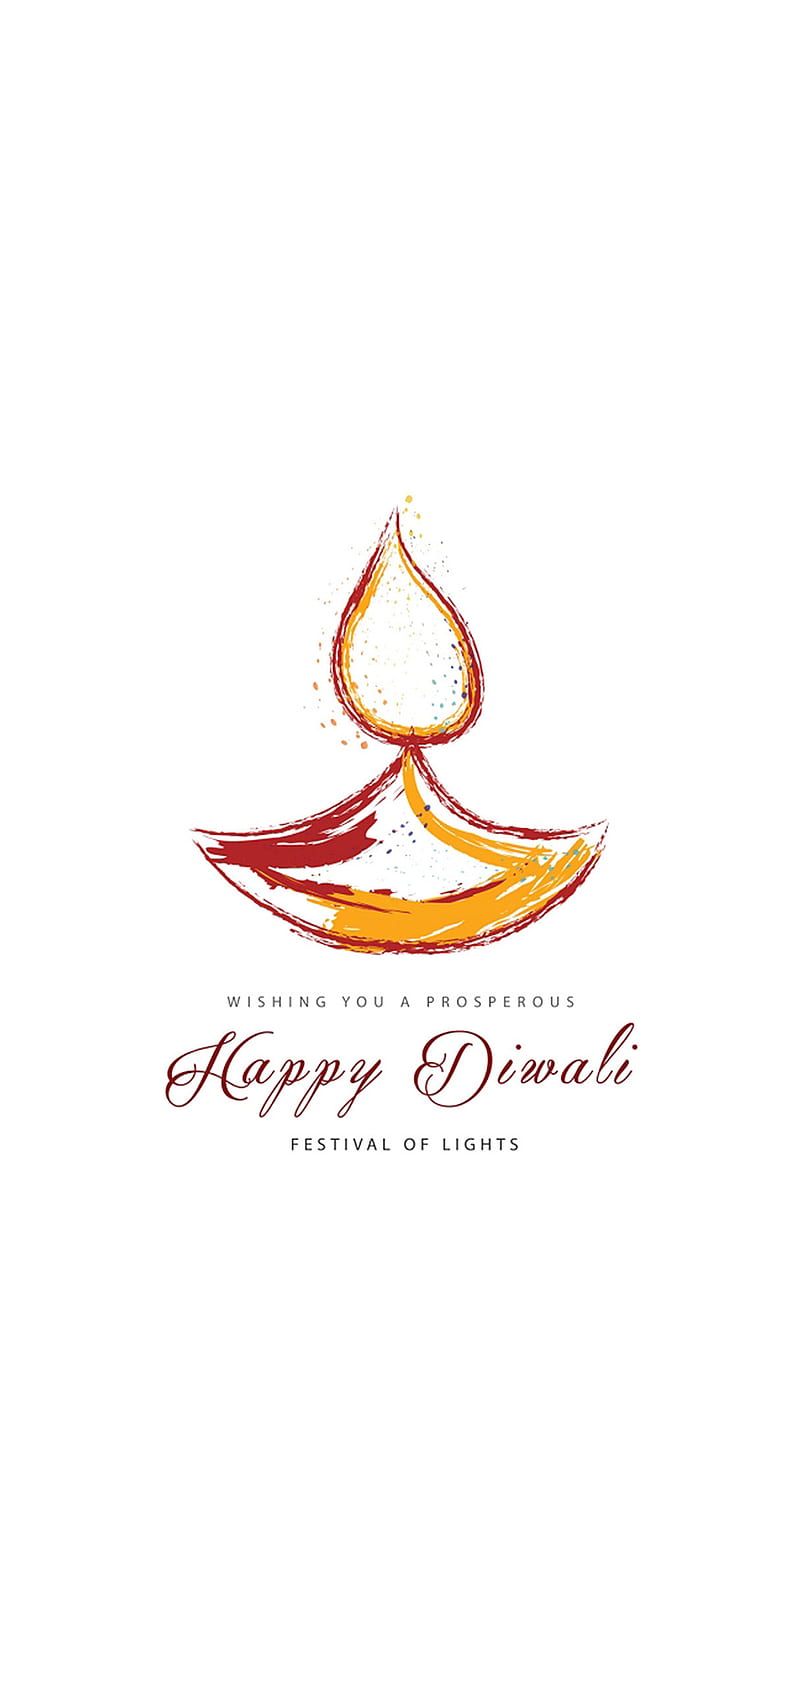 Diwali Background Images HD Pictures For Free Vectors  PSD Download   Lovepikcom